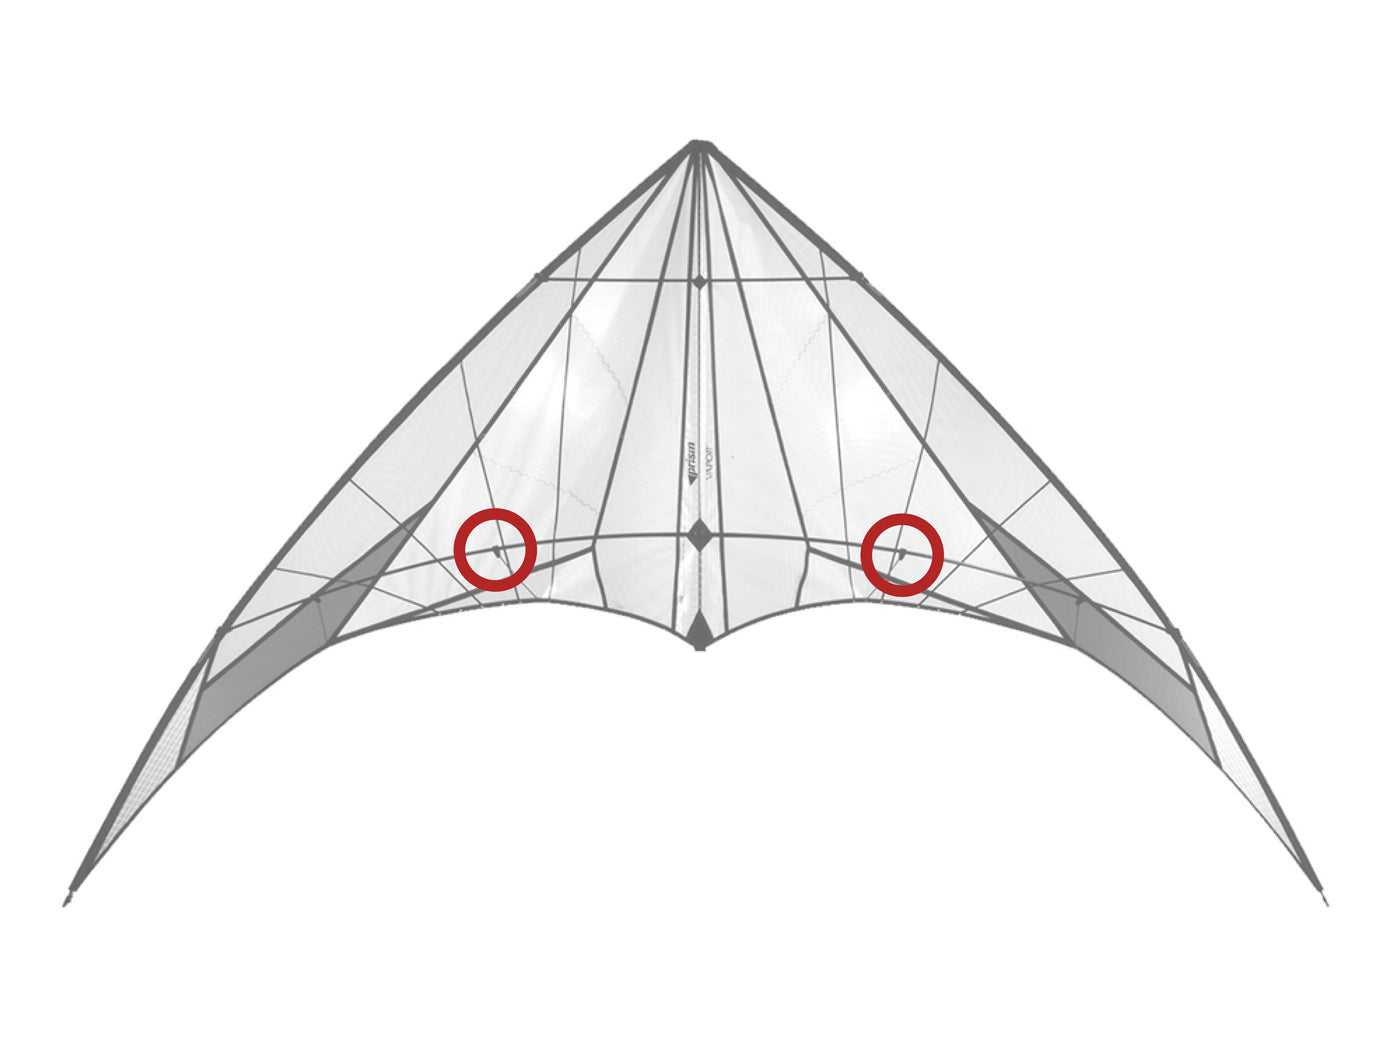 Diagram showing location of the Vapor (1996) Standoff Fittings on the kite.